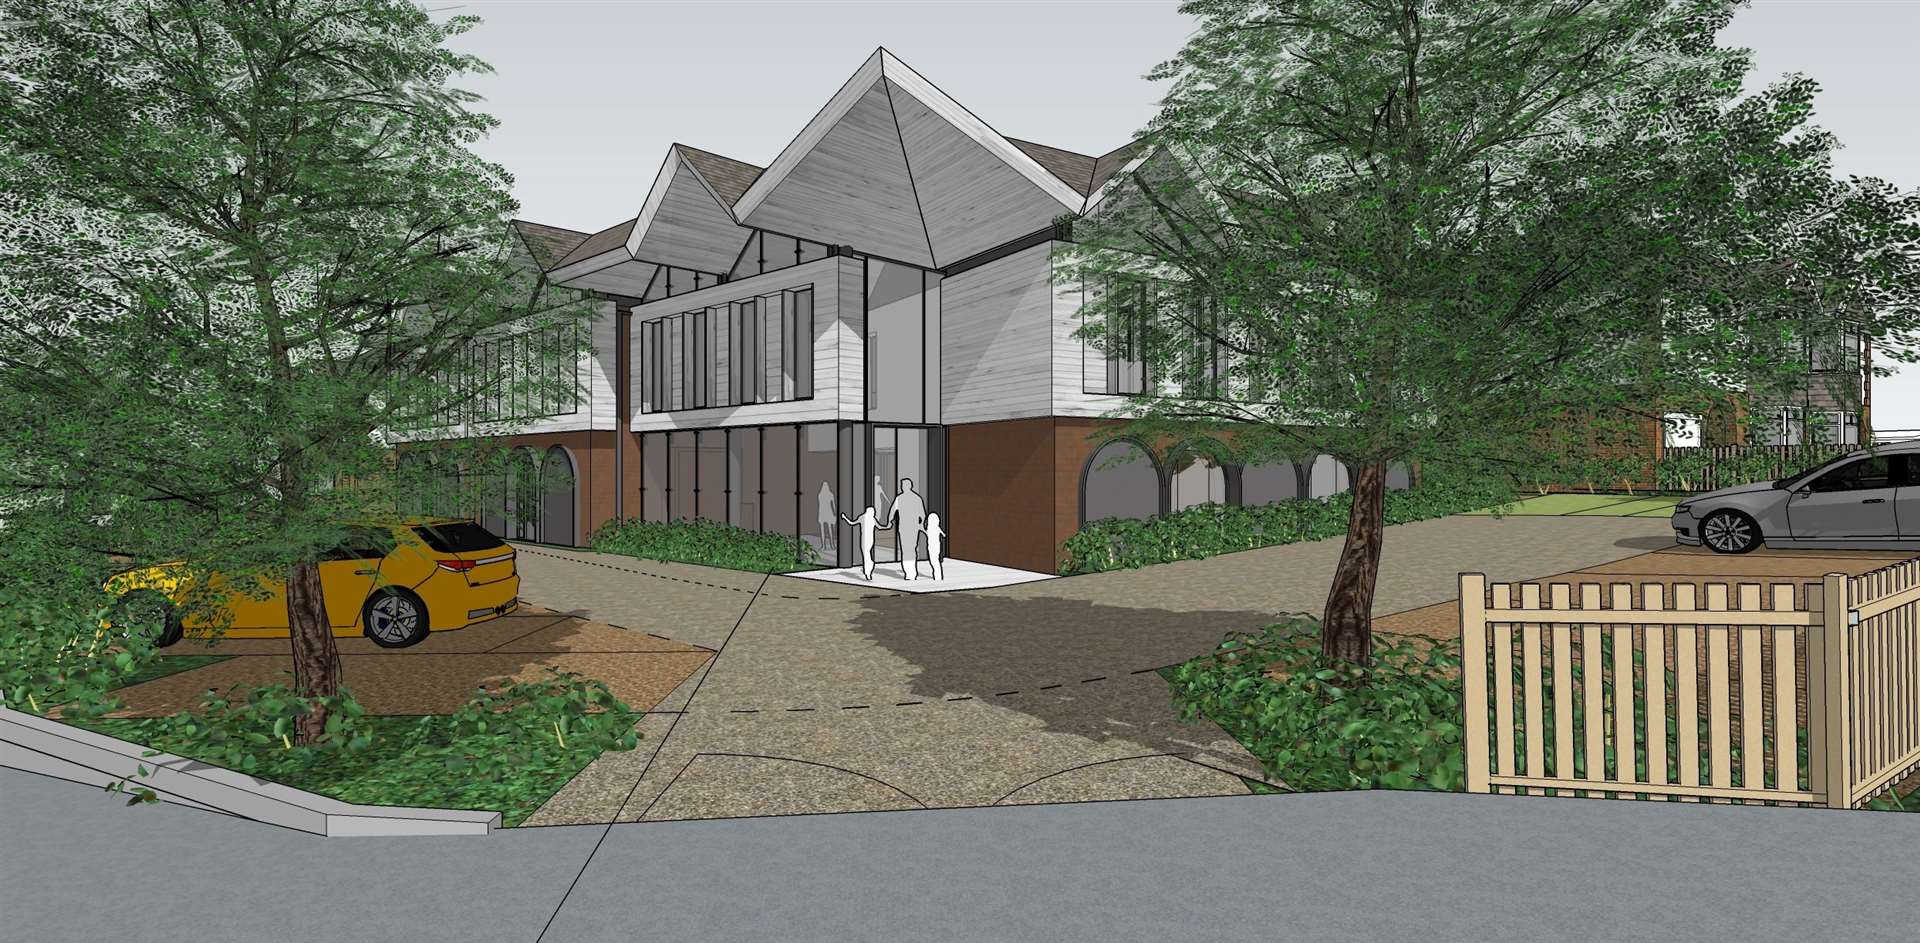 An artist's impression of how the new St Faith's centre will look at Ringlestone